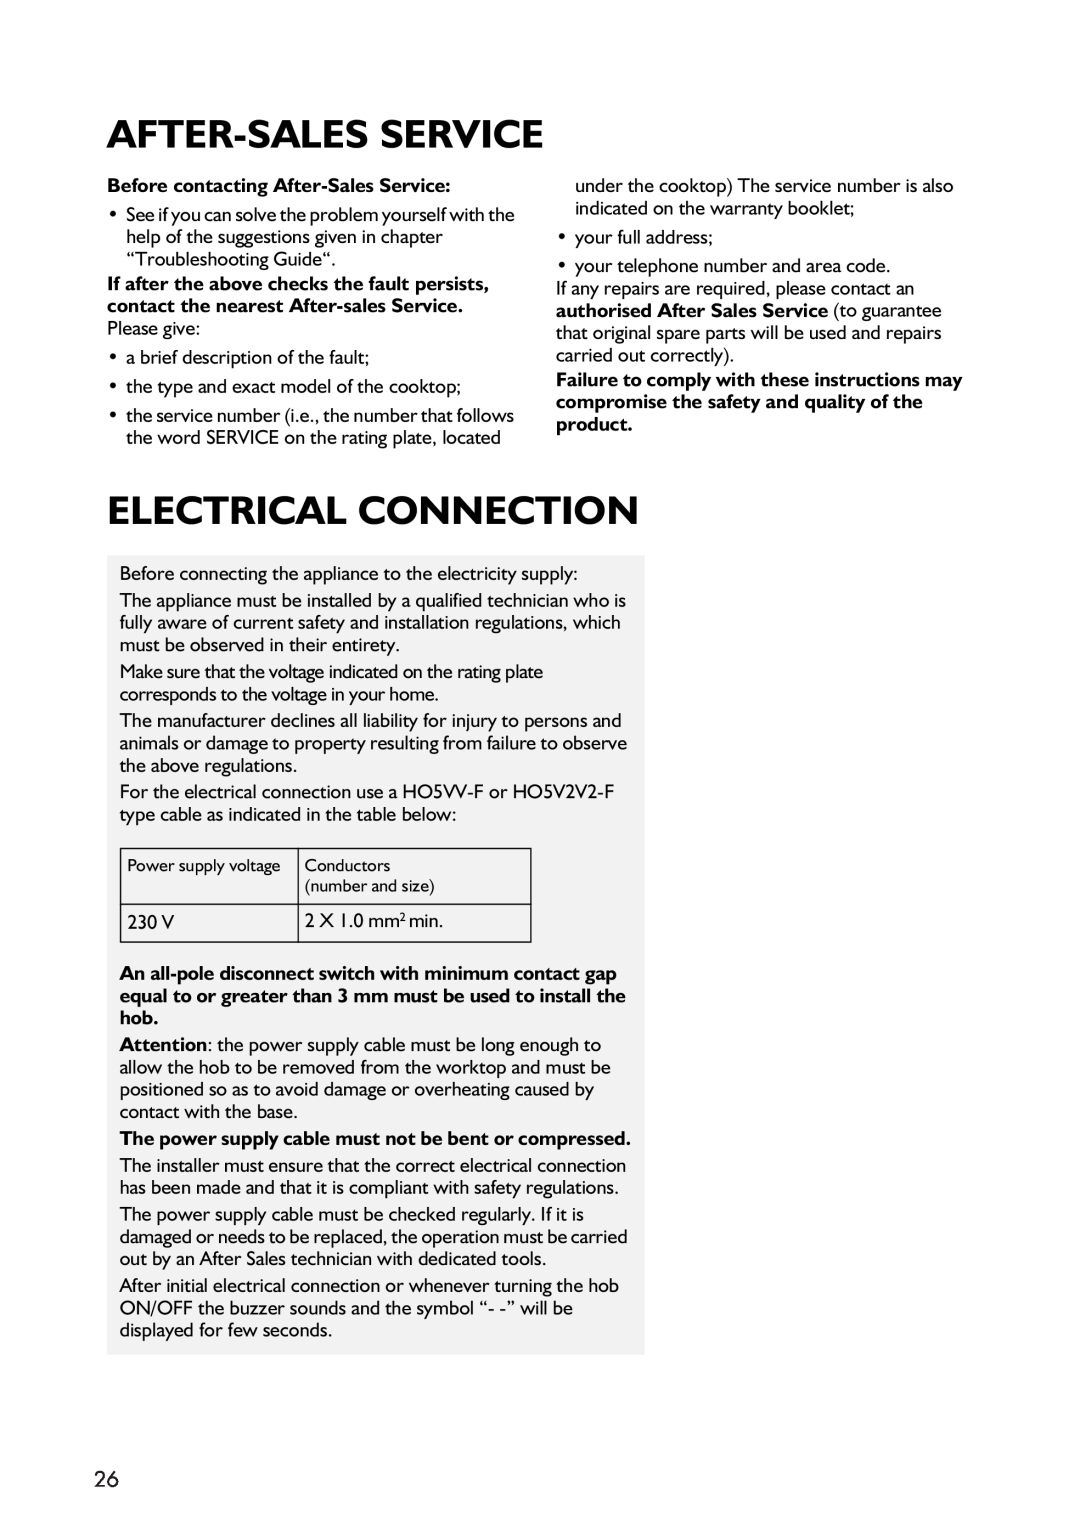 IKEA HIN1T manual After-Salesservice, Electrical Connection 